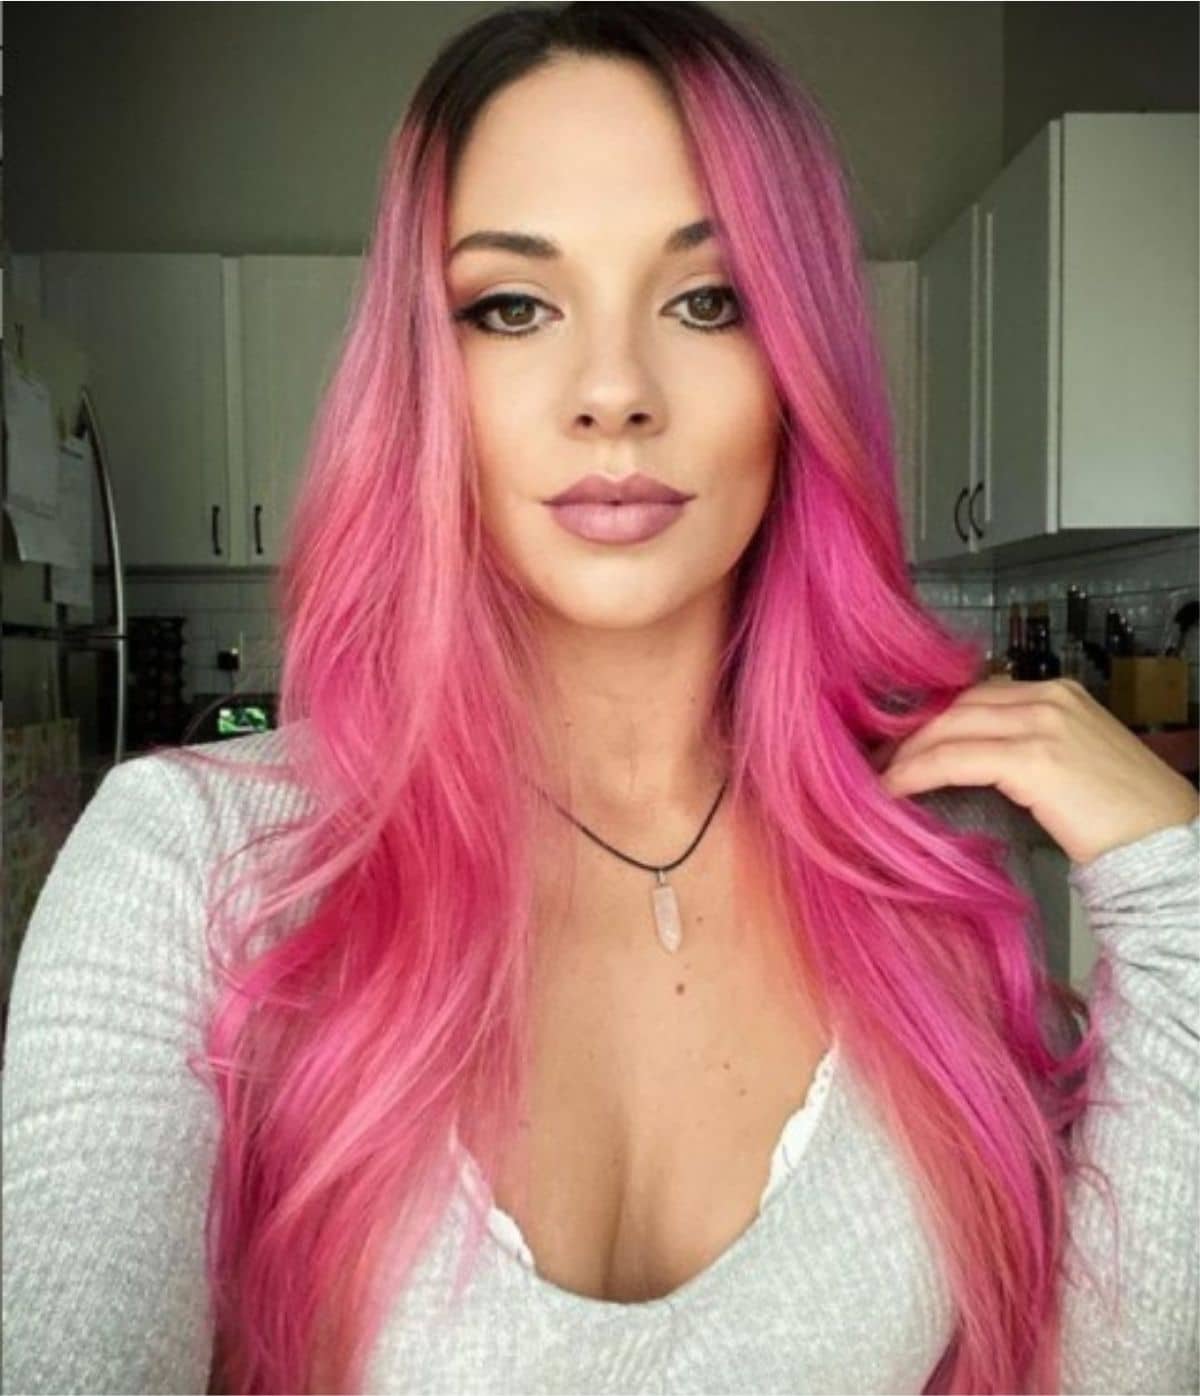 90 Day Fiance: Before the 90 Days star, Avery Warner, shows off new pink hair.